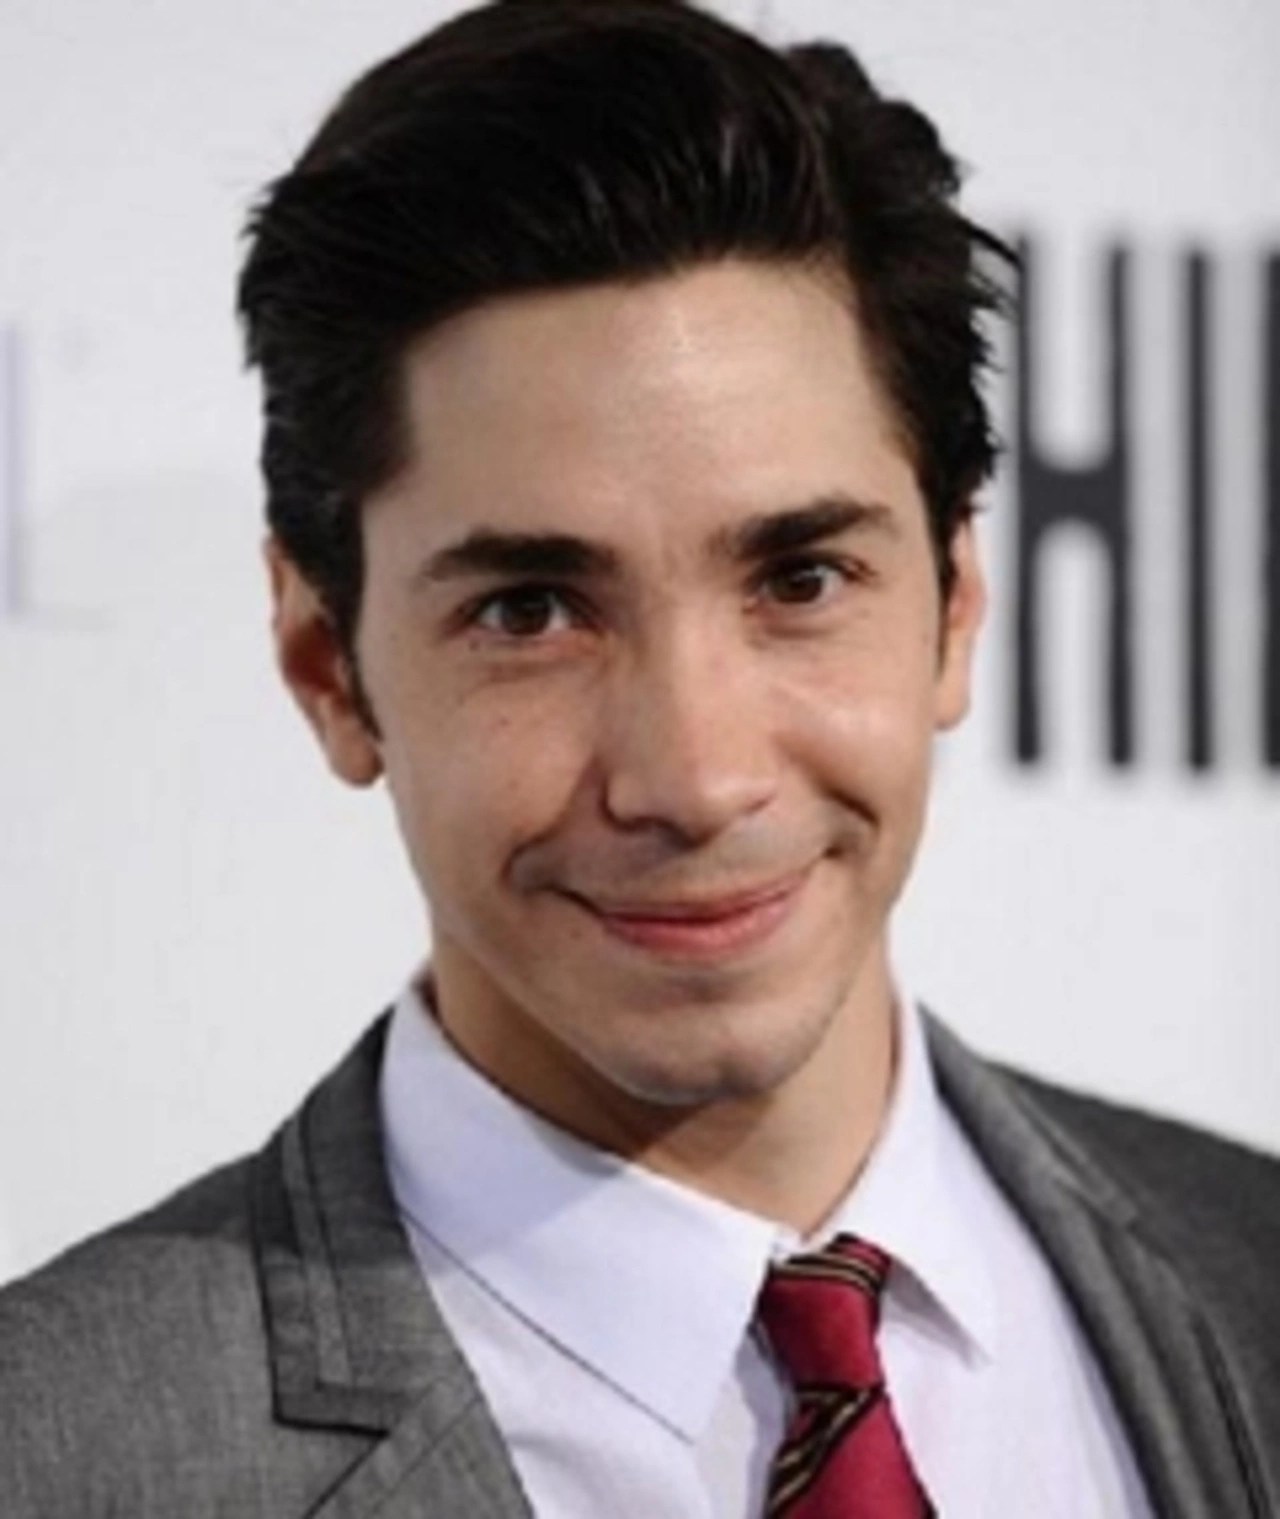 Justin Long Movies, Bio and Lists on MUBI